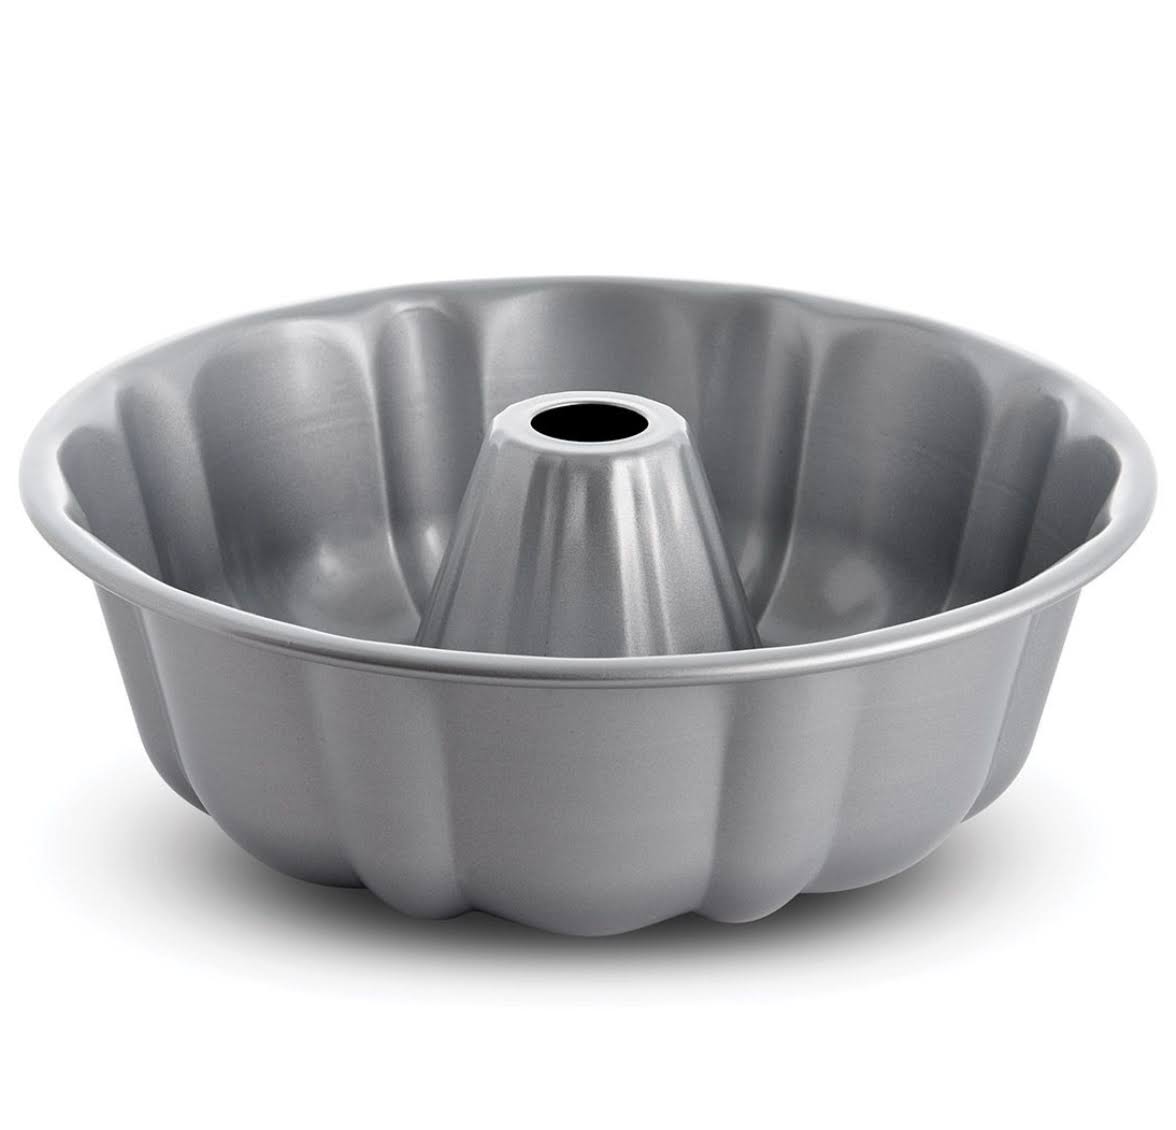 Mrs. Anderson's Baking Nonstick Fluted Cake Pan, 10in